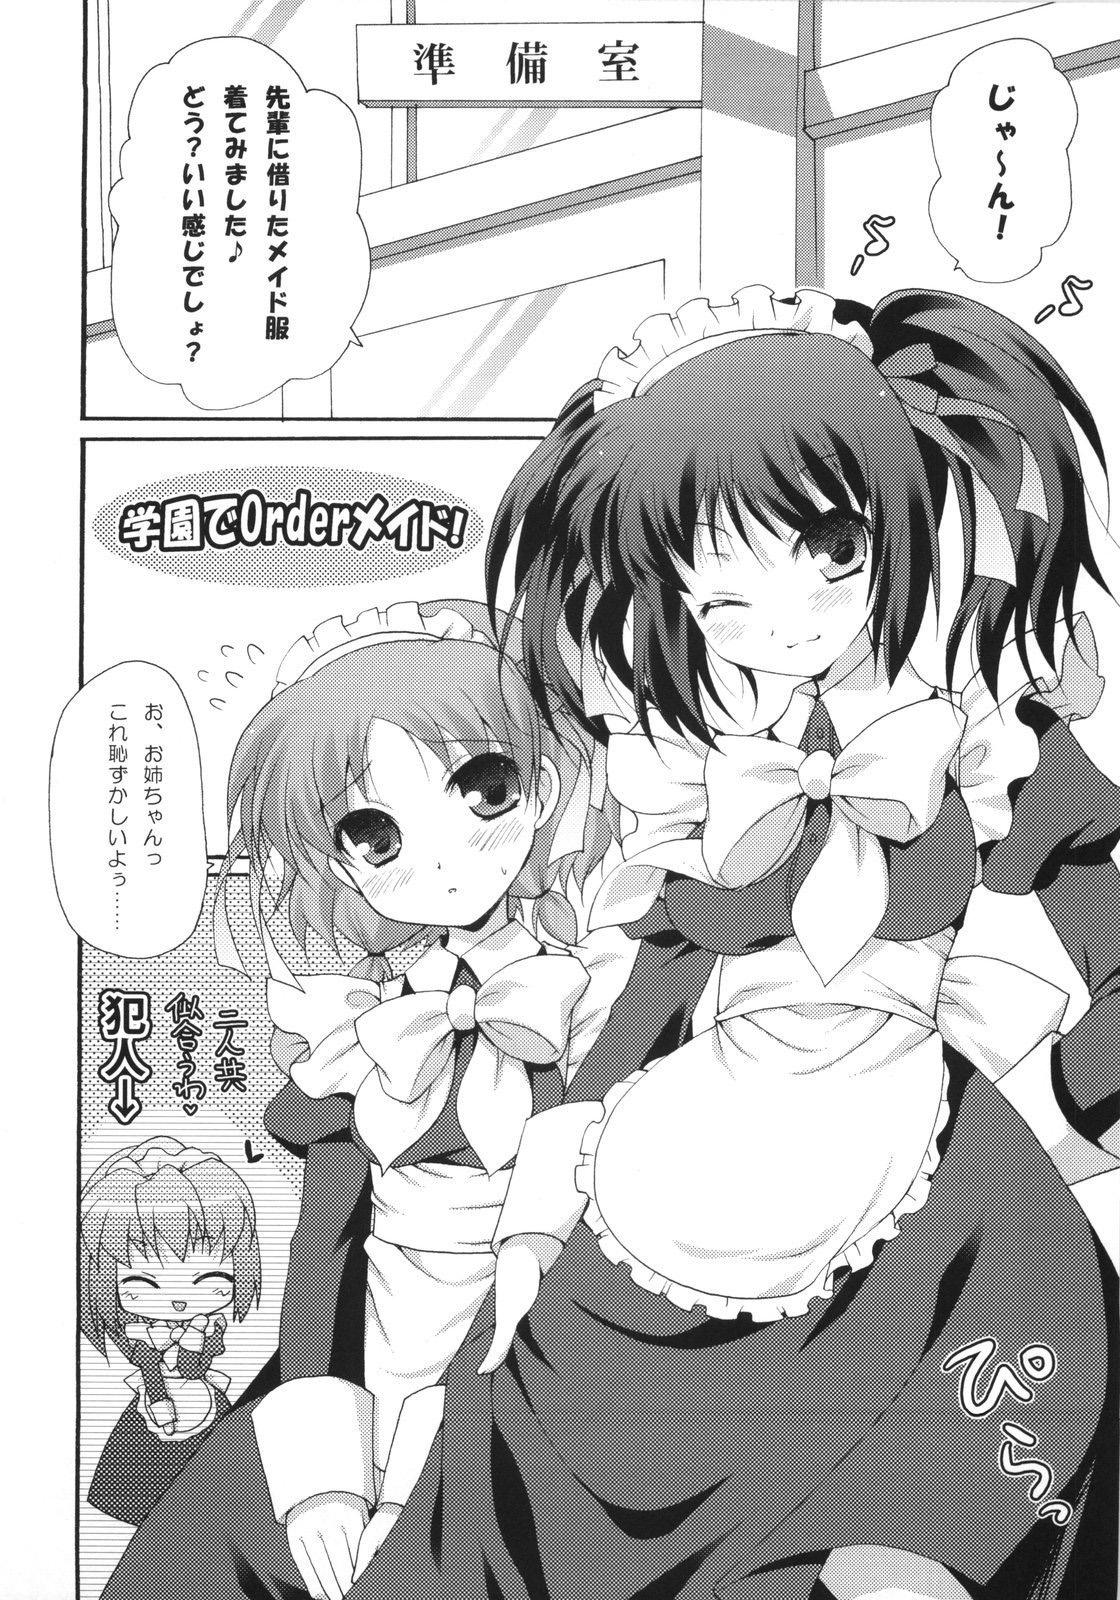 Special Locations i2M Iincho, Imouto, Maid-san Soushuuhen - Pangya Friends - Page 3